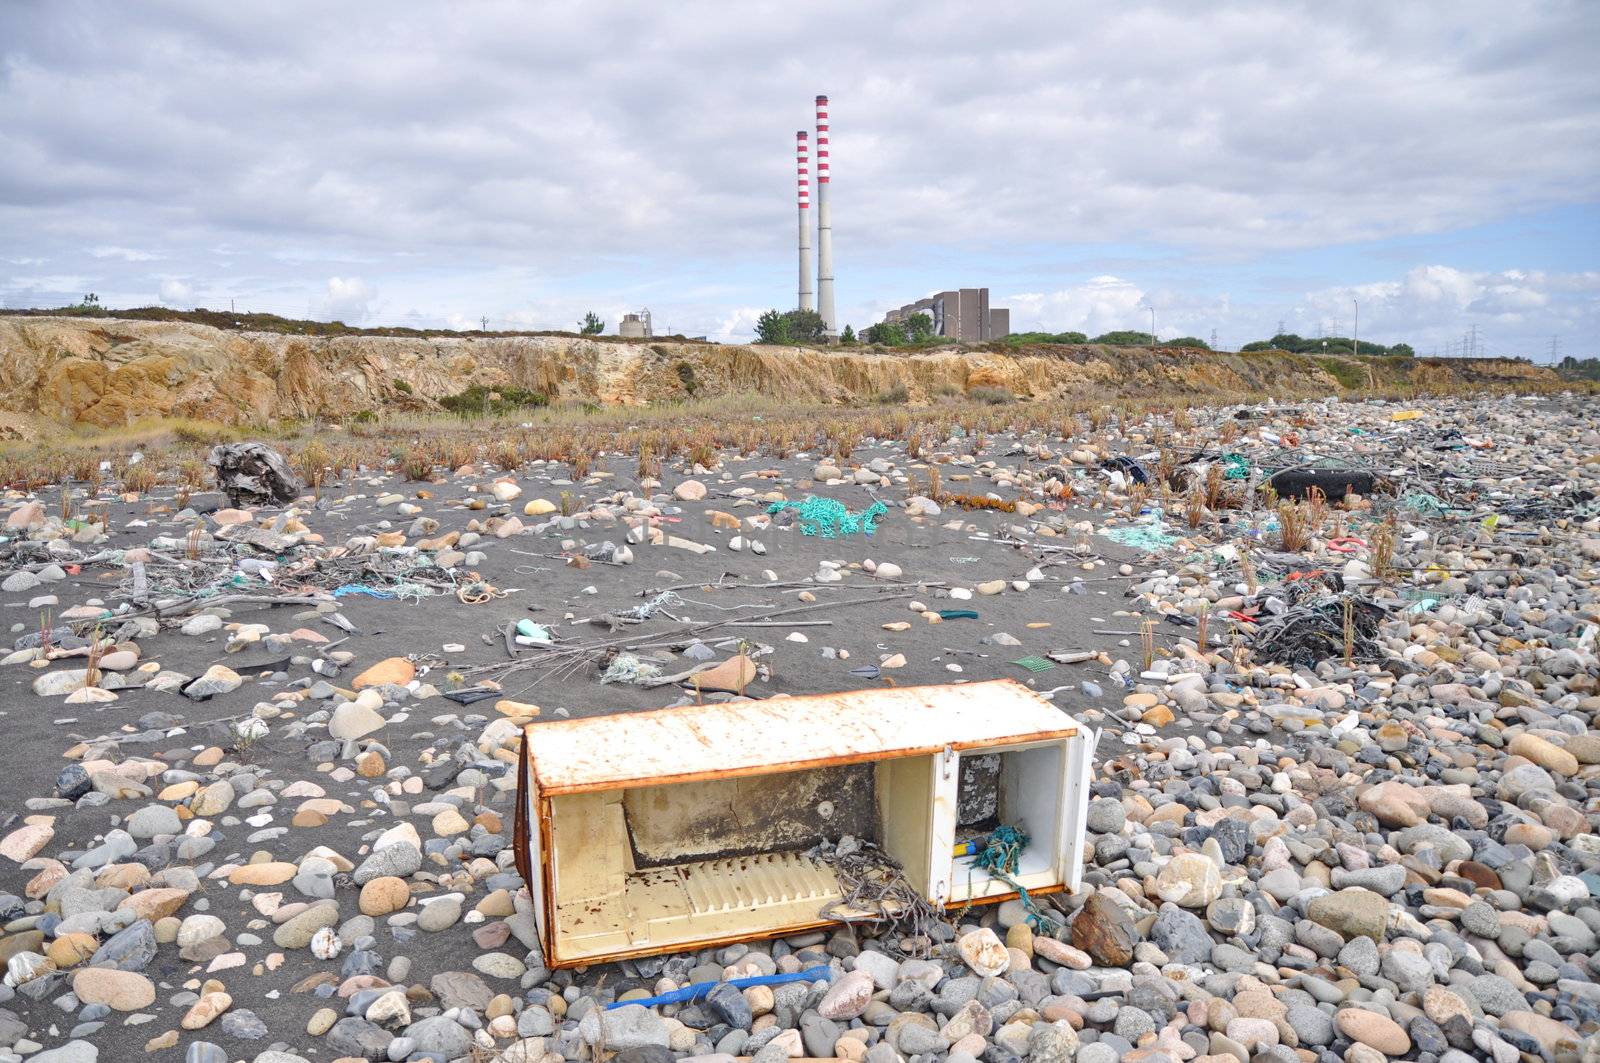 Trashed fridge on the seashore next to a factory